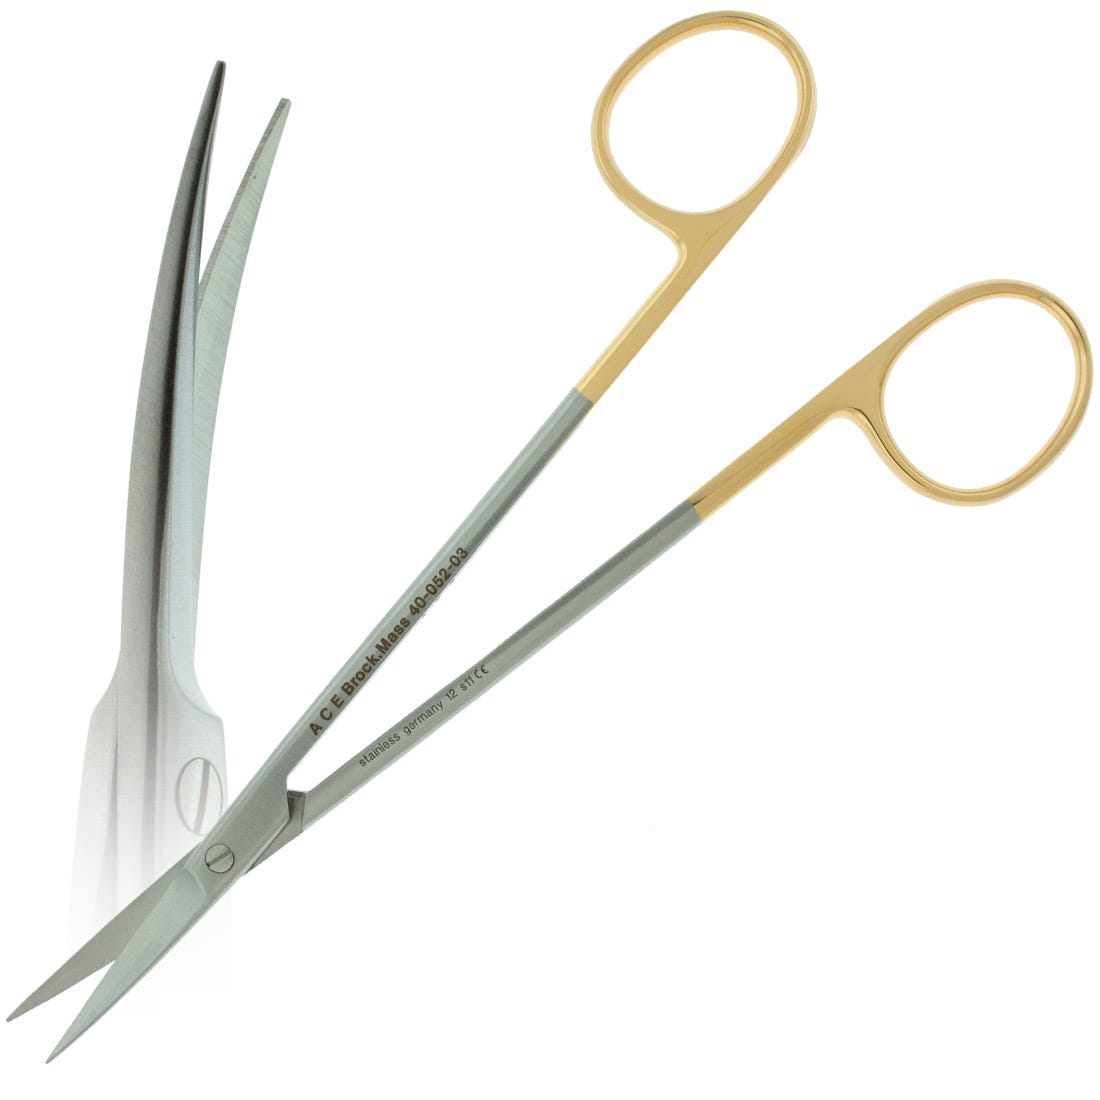 ACE Kelly Scissors, curved, tungsten carbide tips